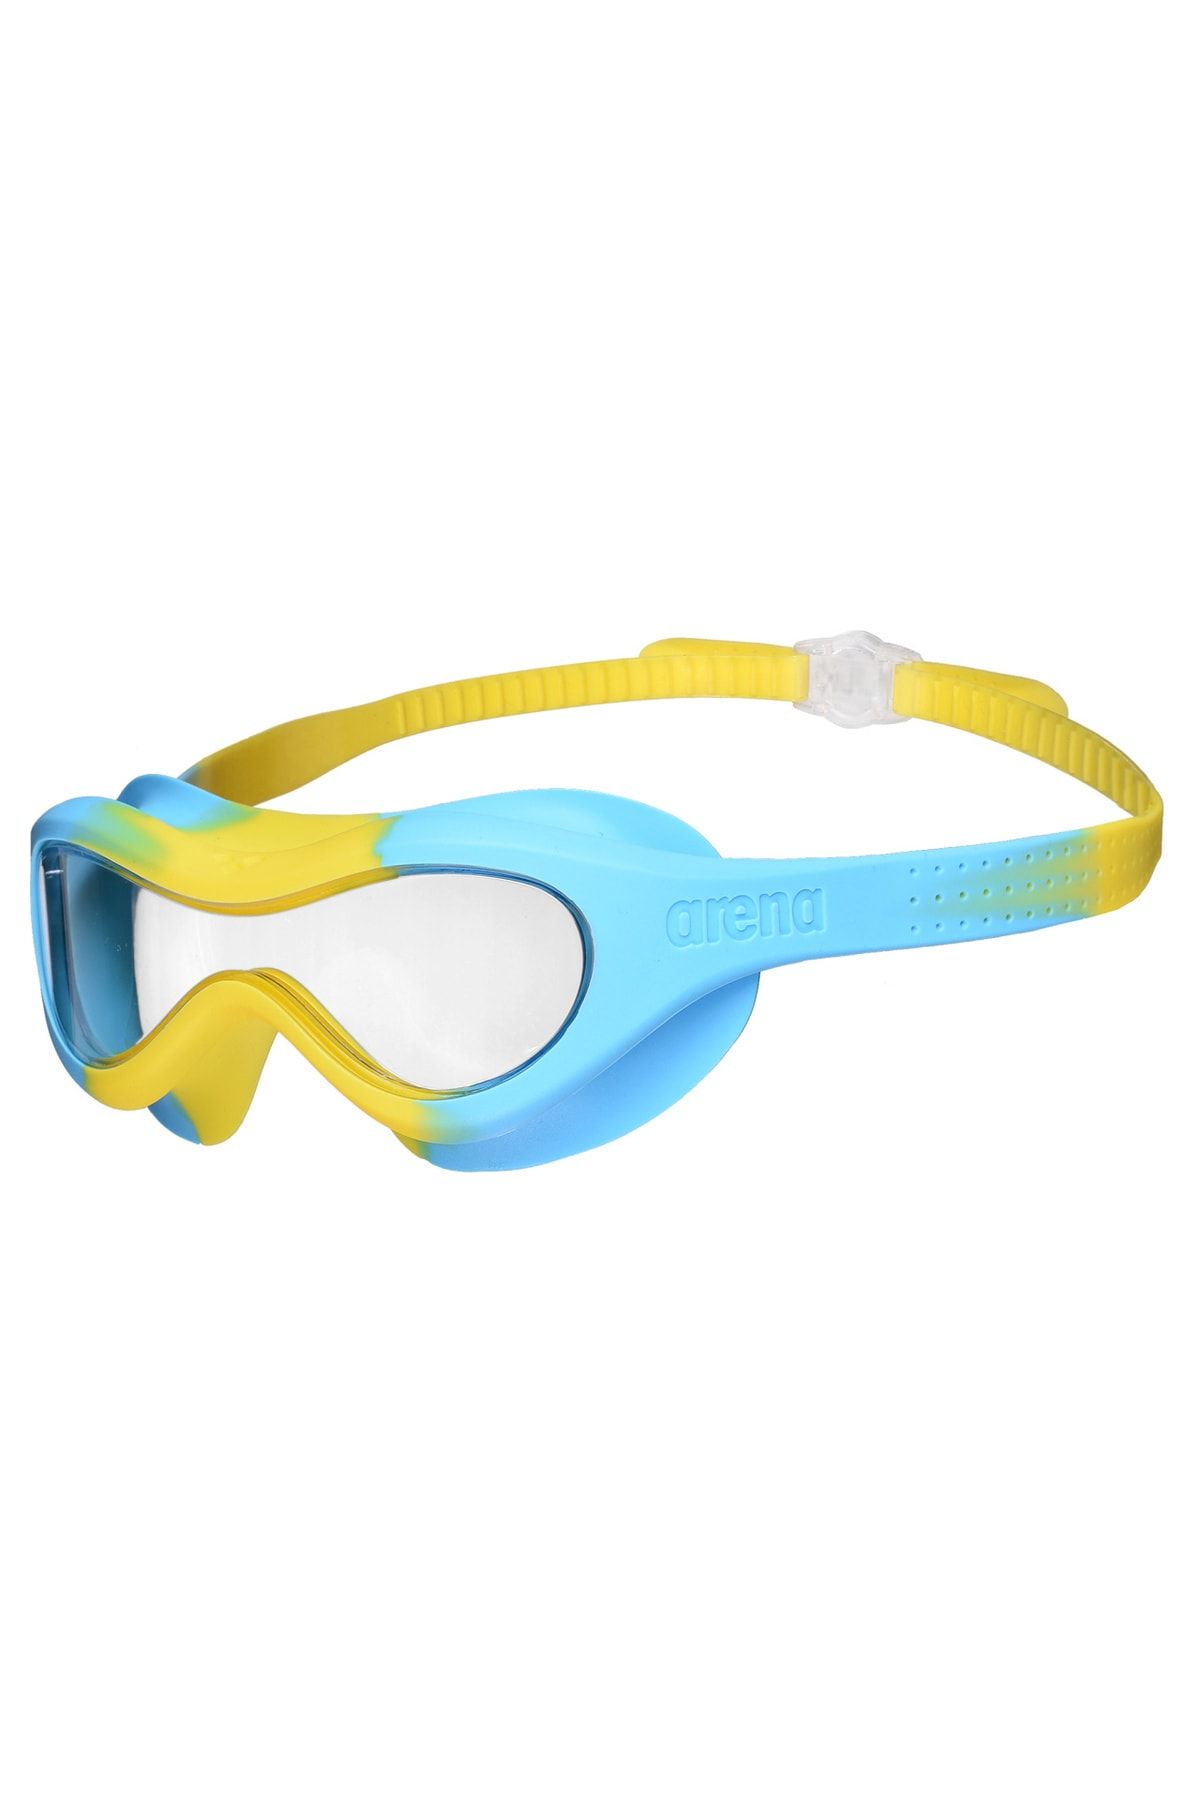 Arena SPIDER KIDS MASK CLEAR YELLOW LIGHT BLUE